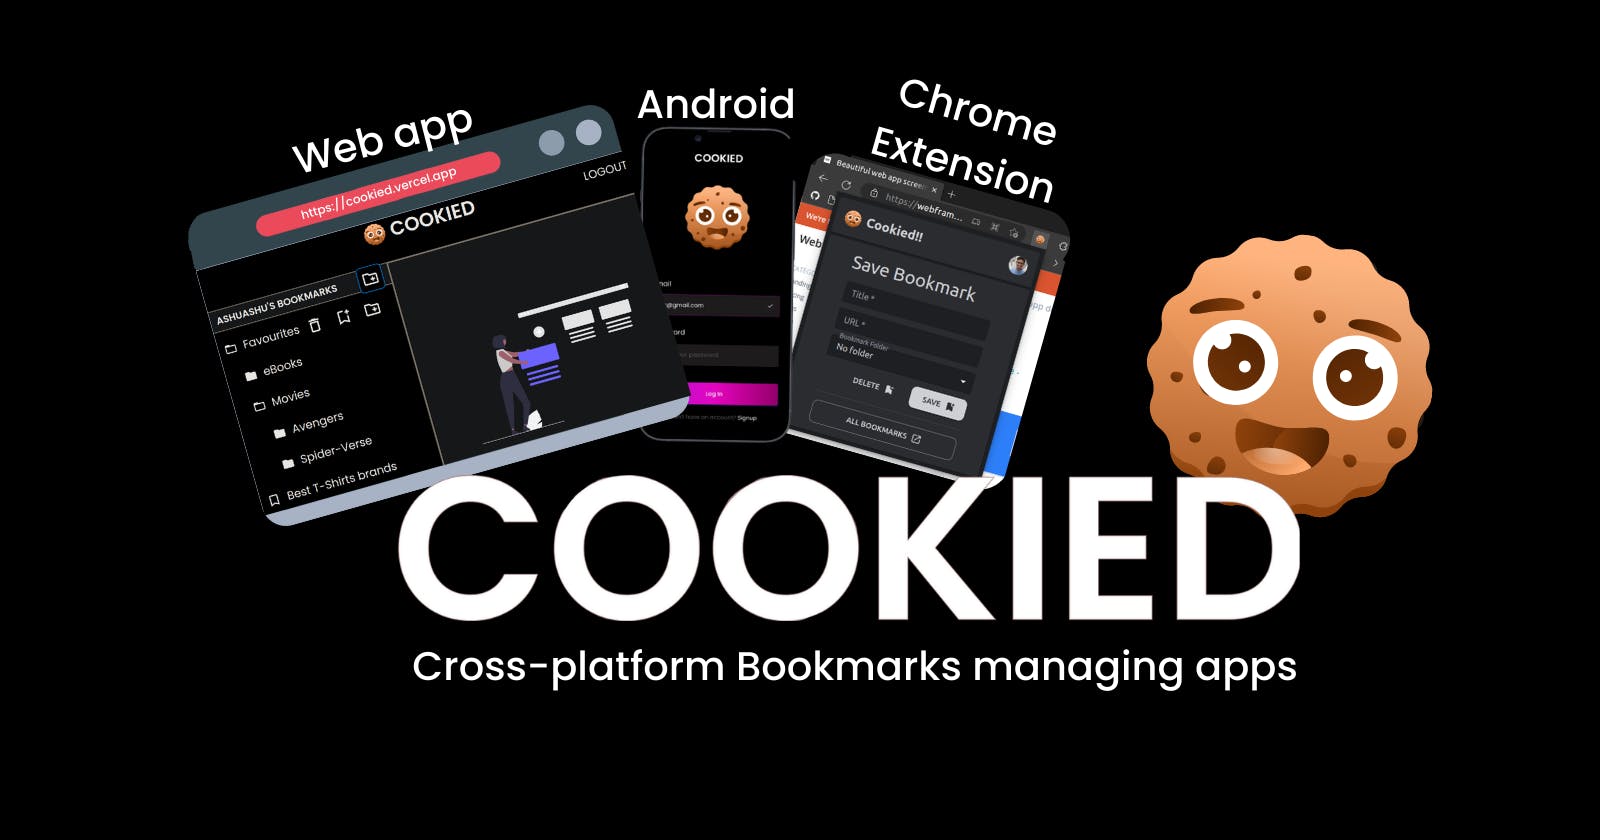 Cookied: Appwrite Hackathon project